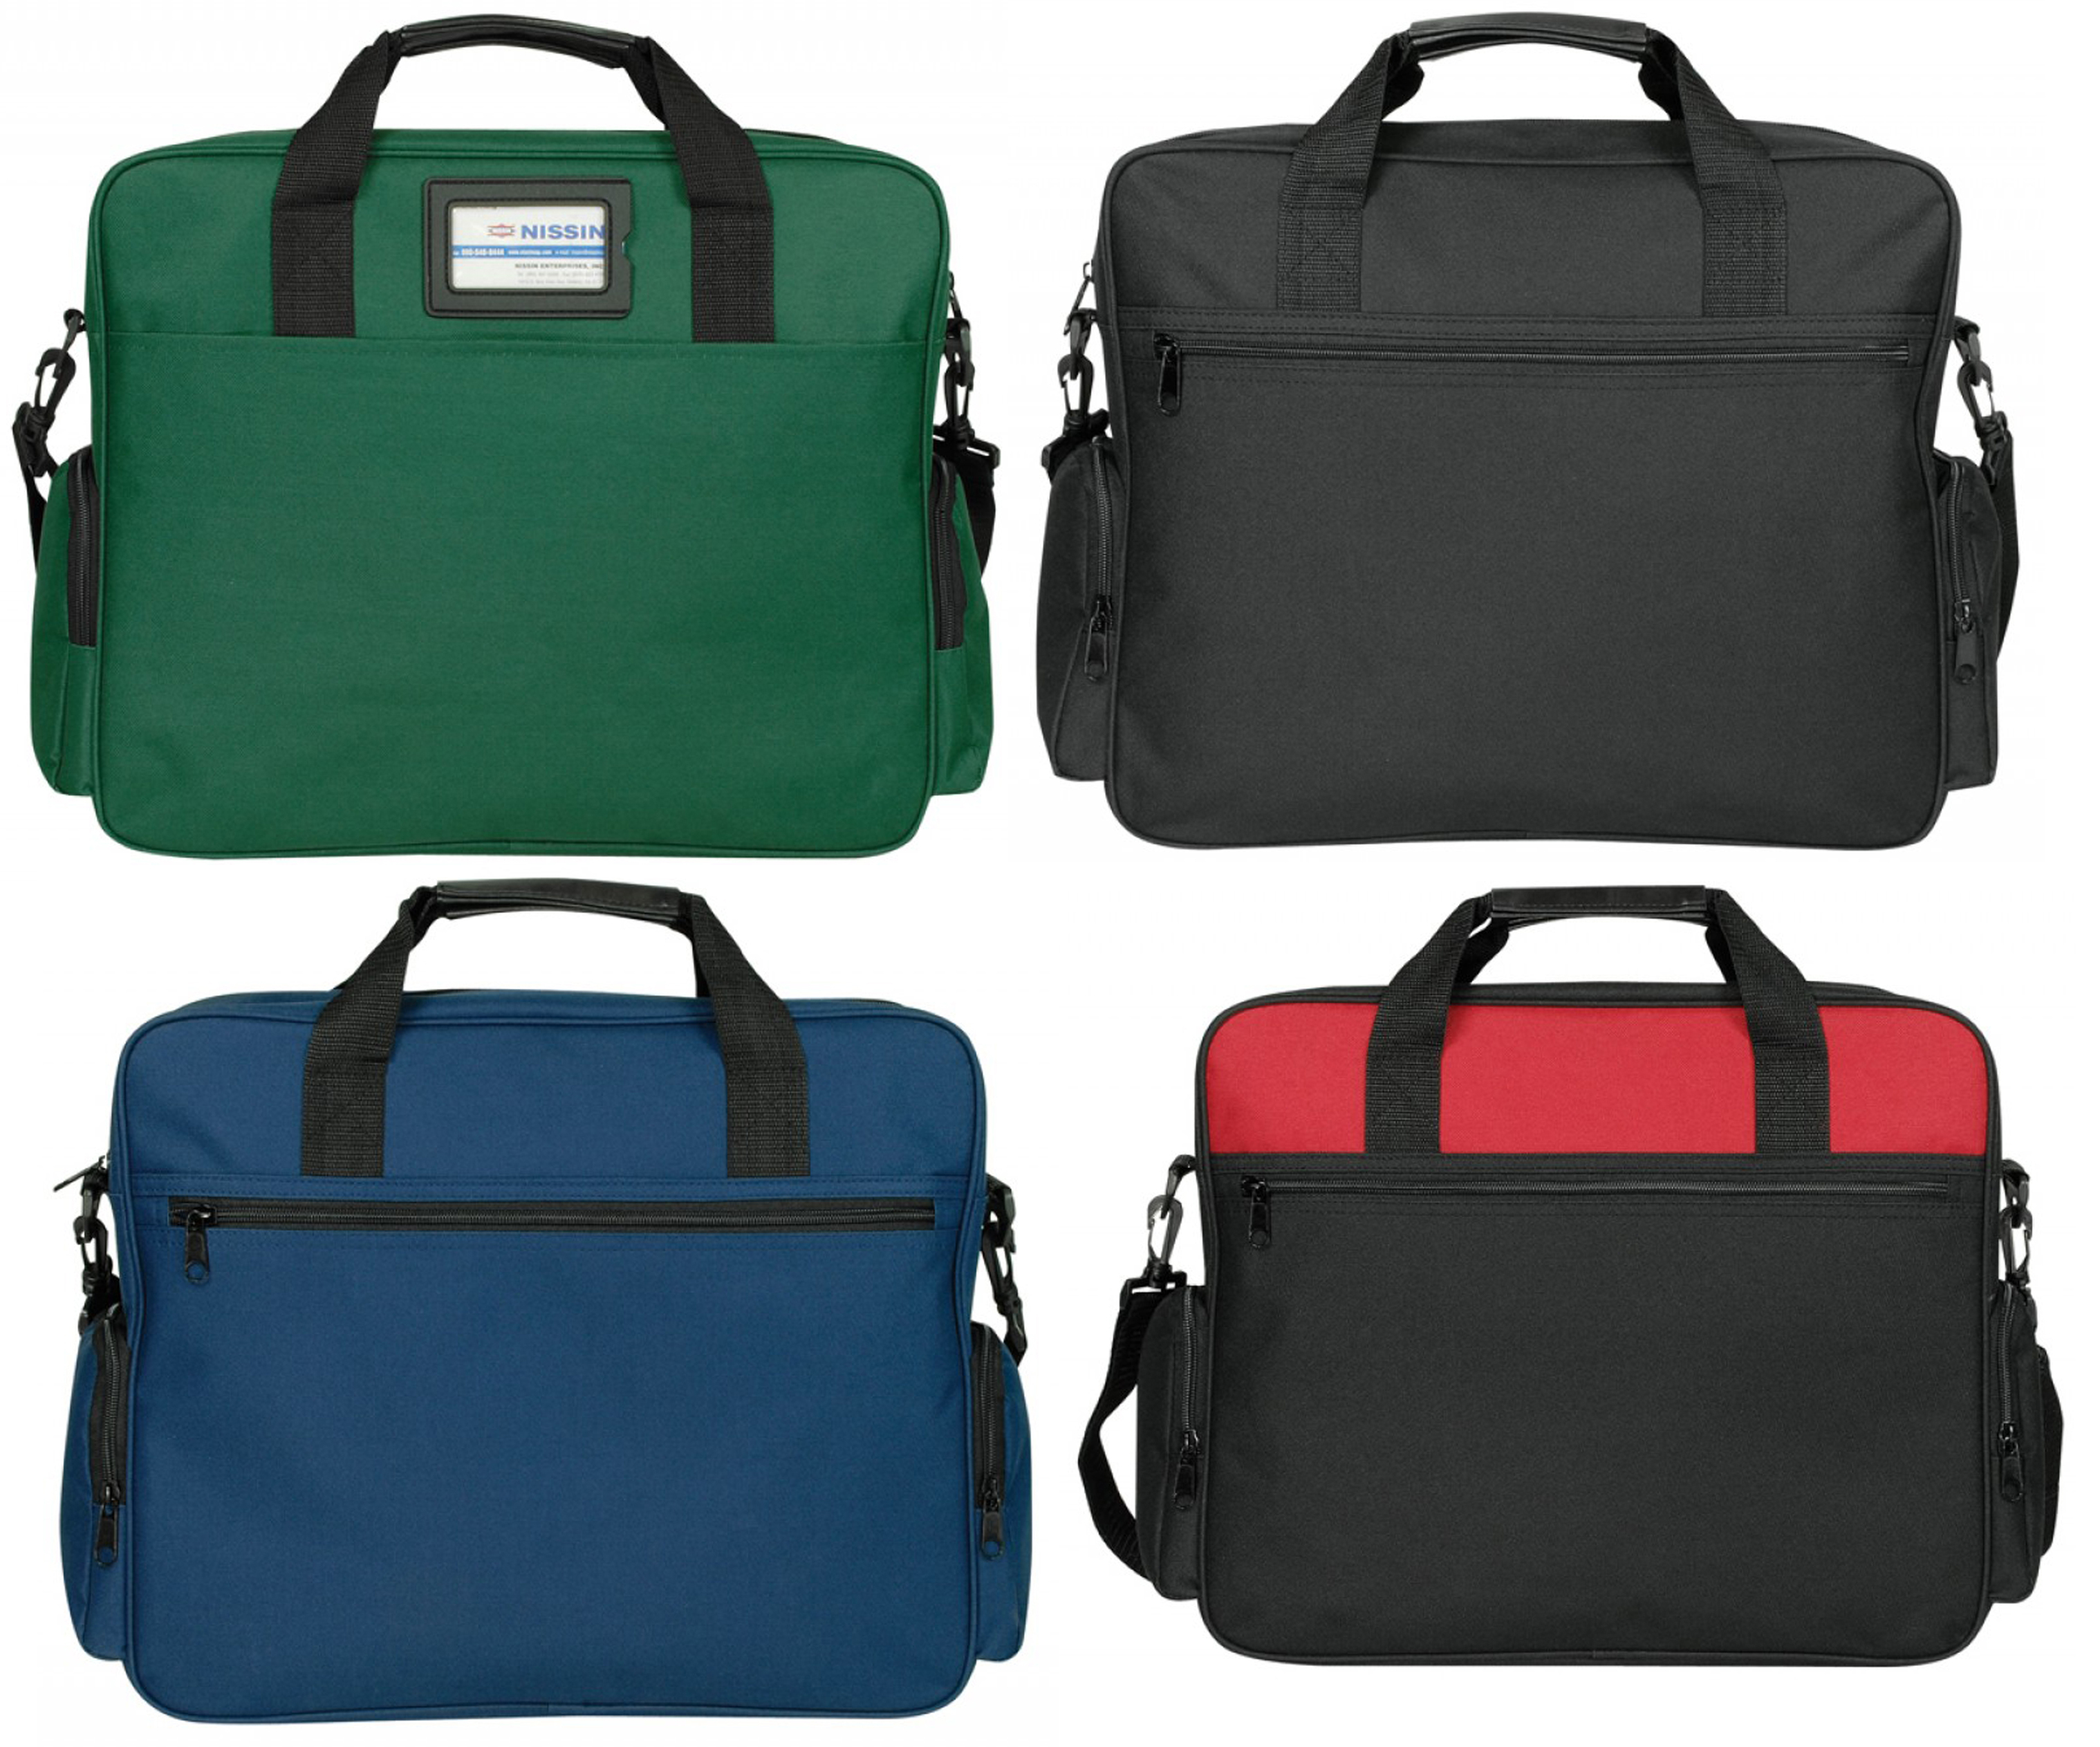 Deluxe Briefcases w/ Two Side Pockets